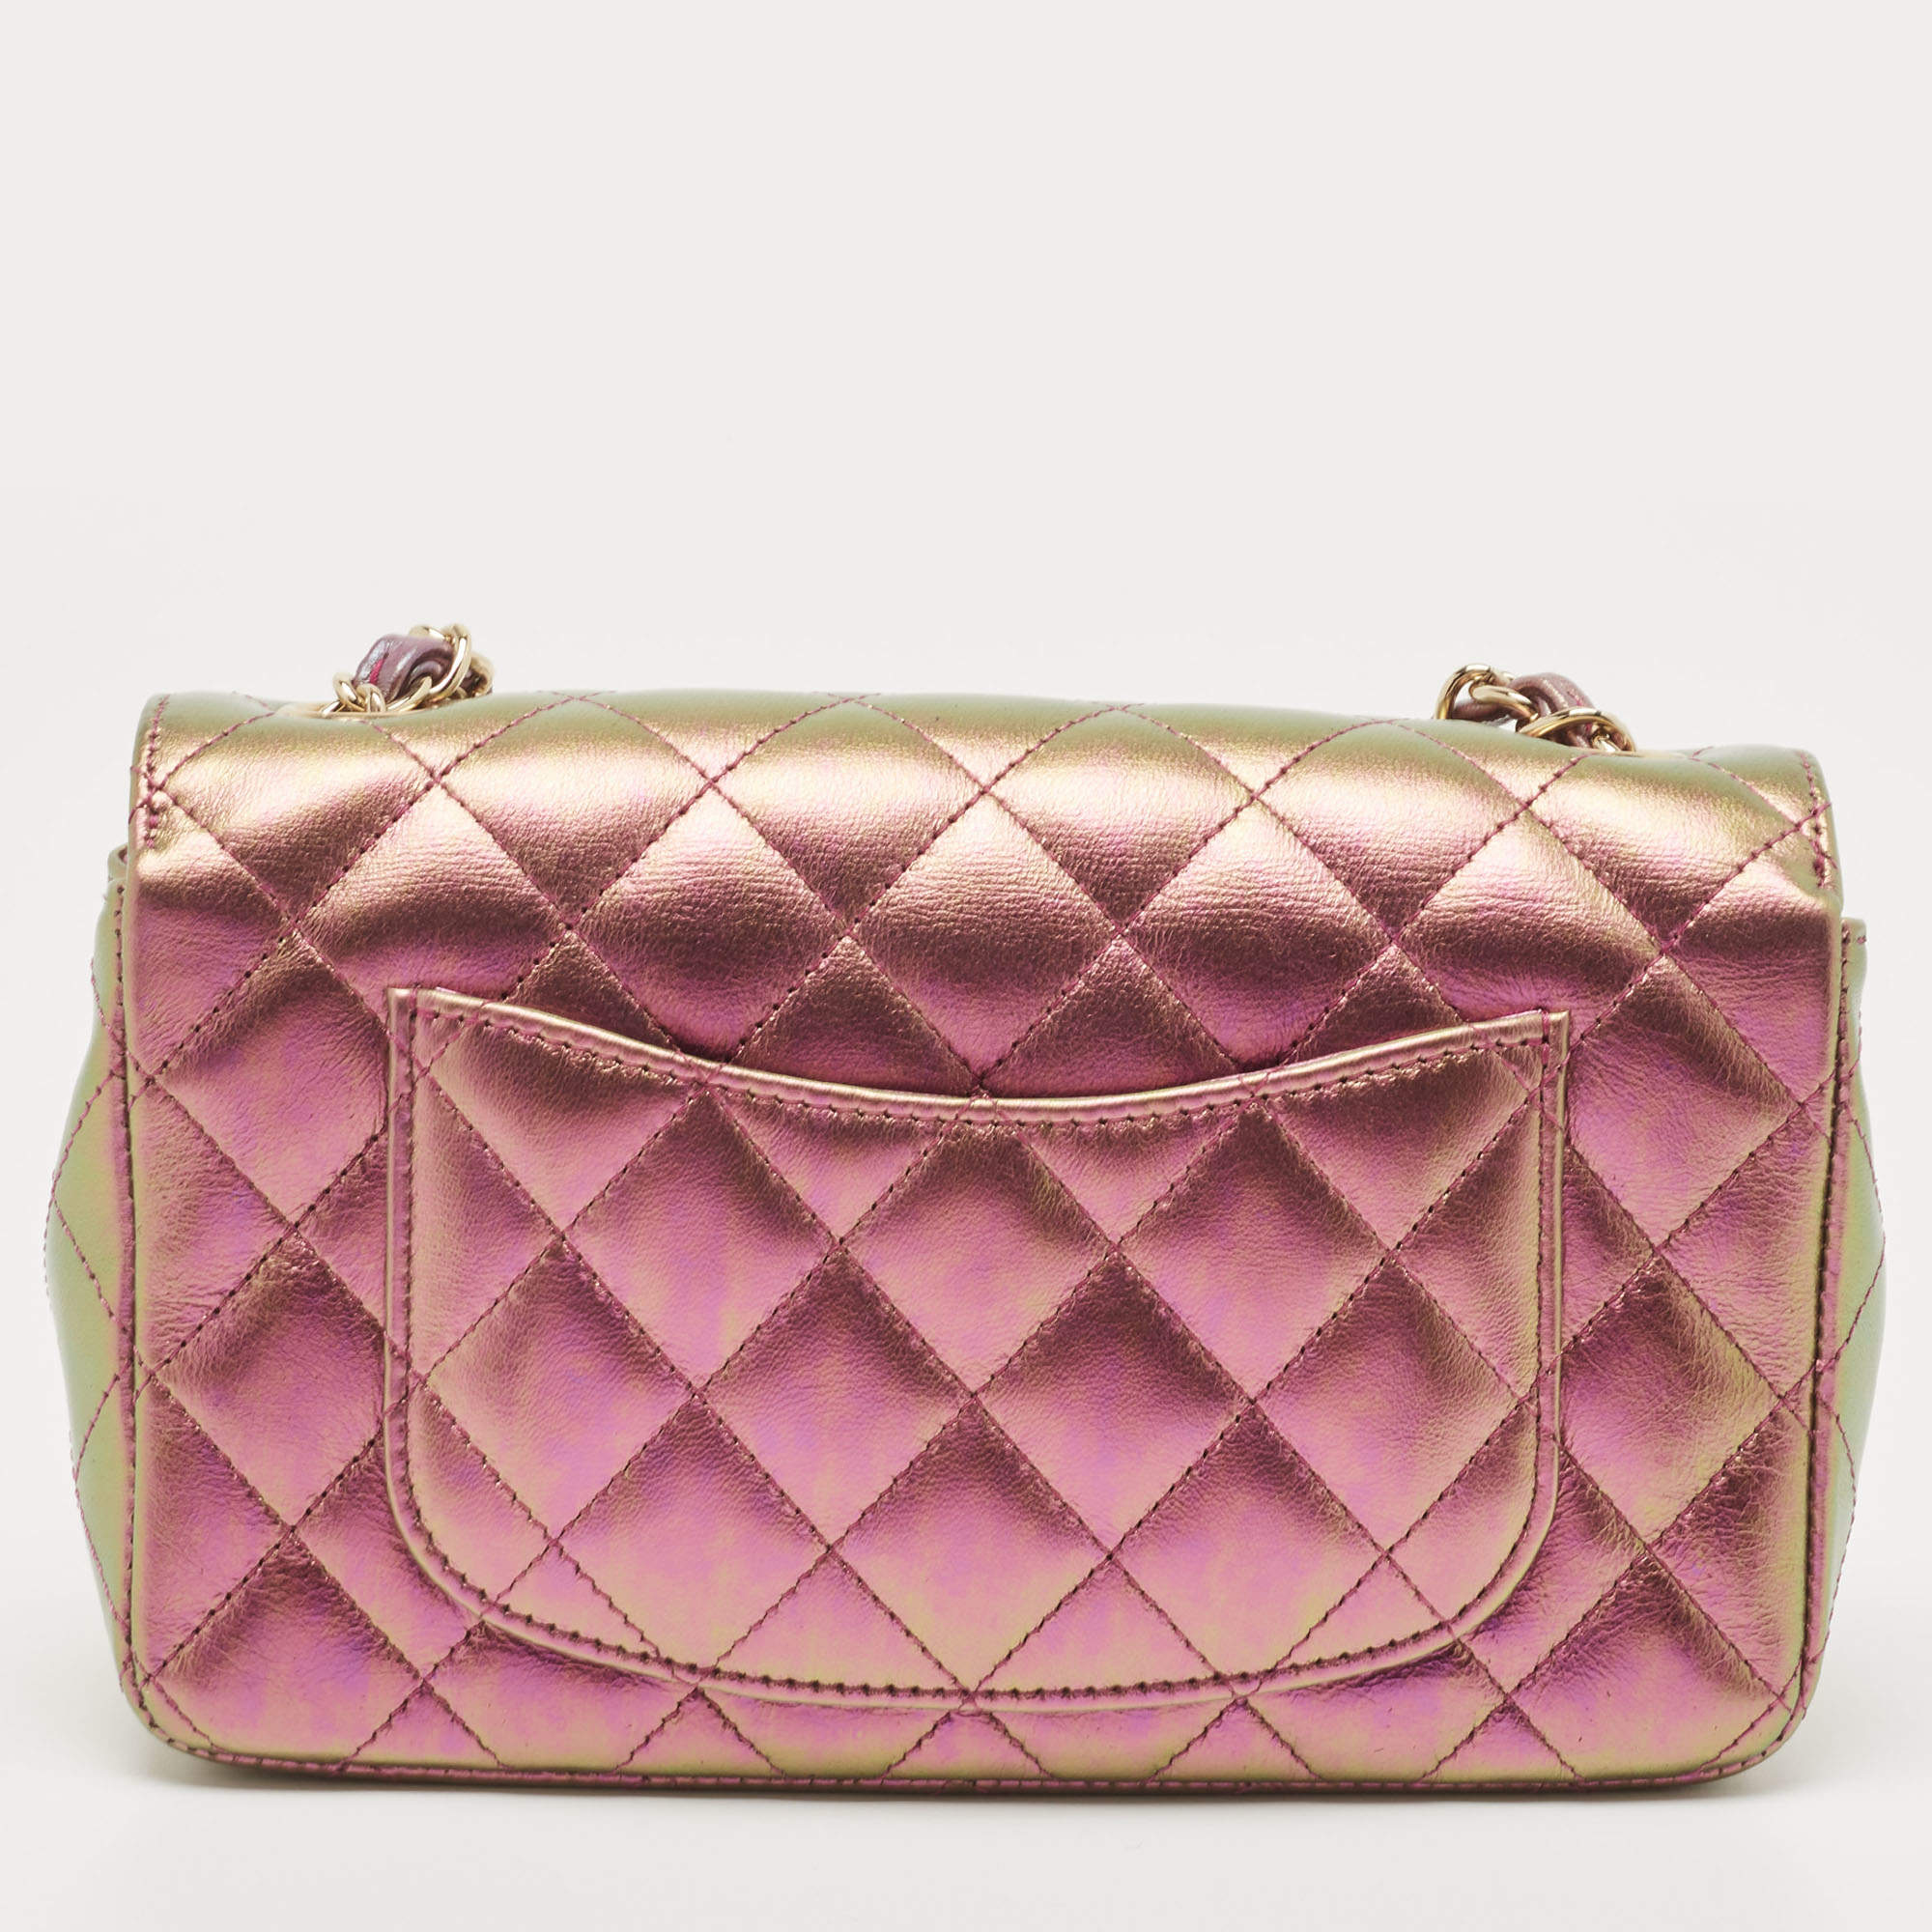 New 2021 Chanel Iridescent Classic Flap Wallet.